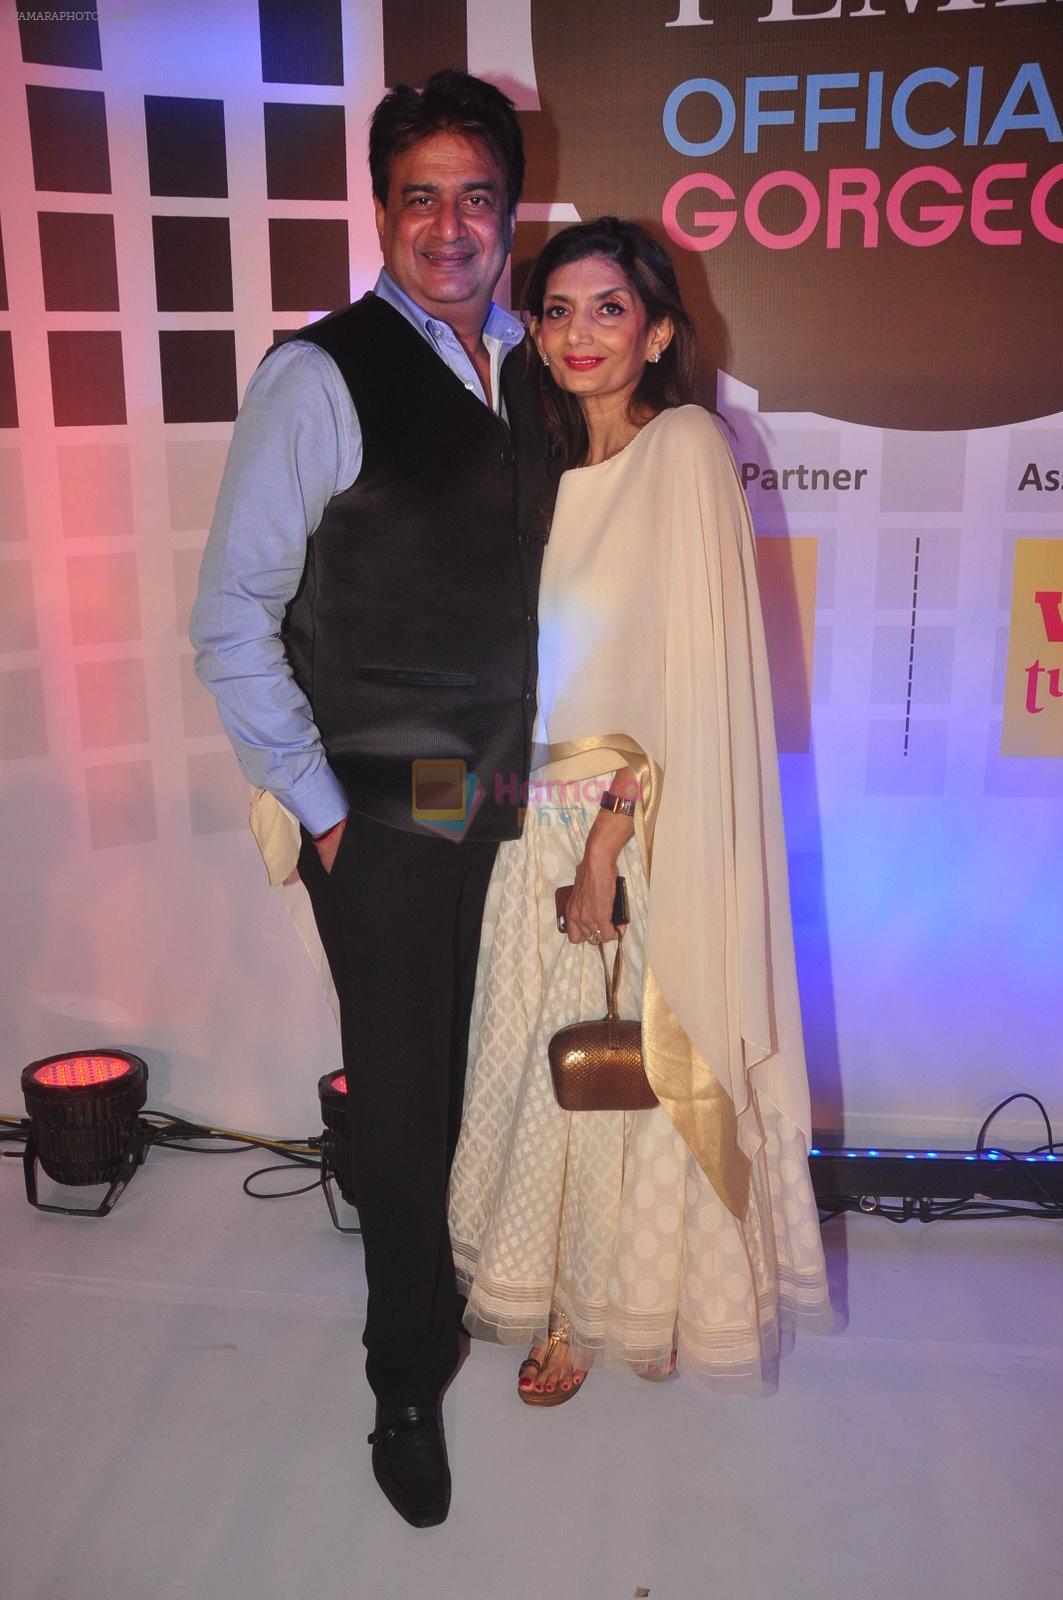 at Femina Officially Gorgeous in Pune on 9th Dec 2014